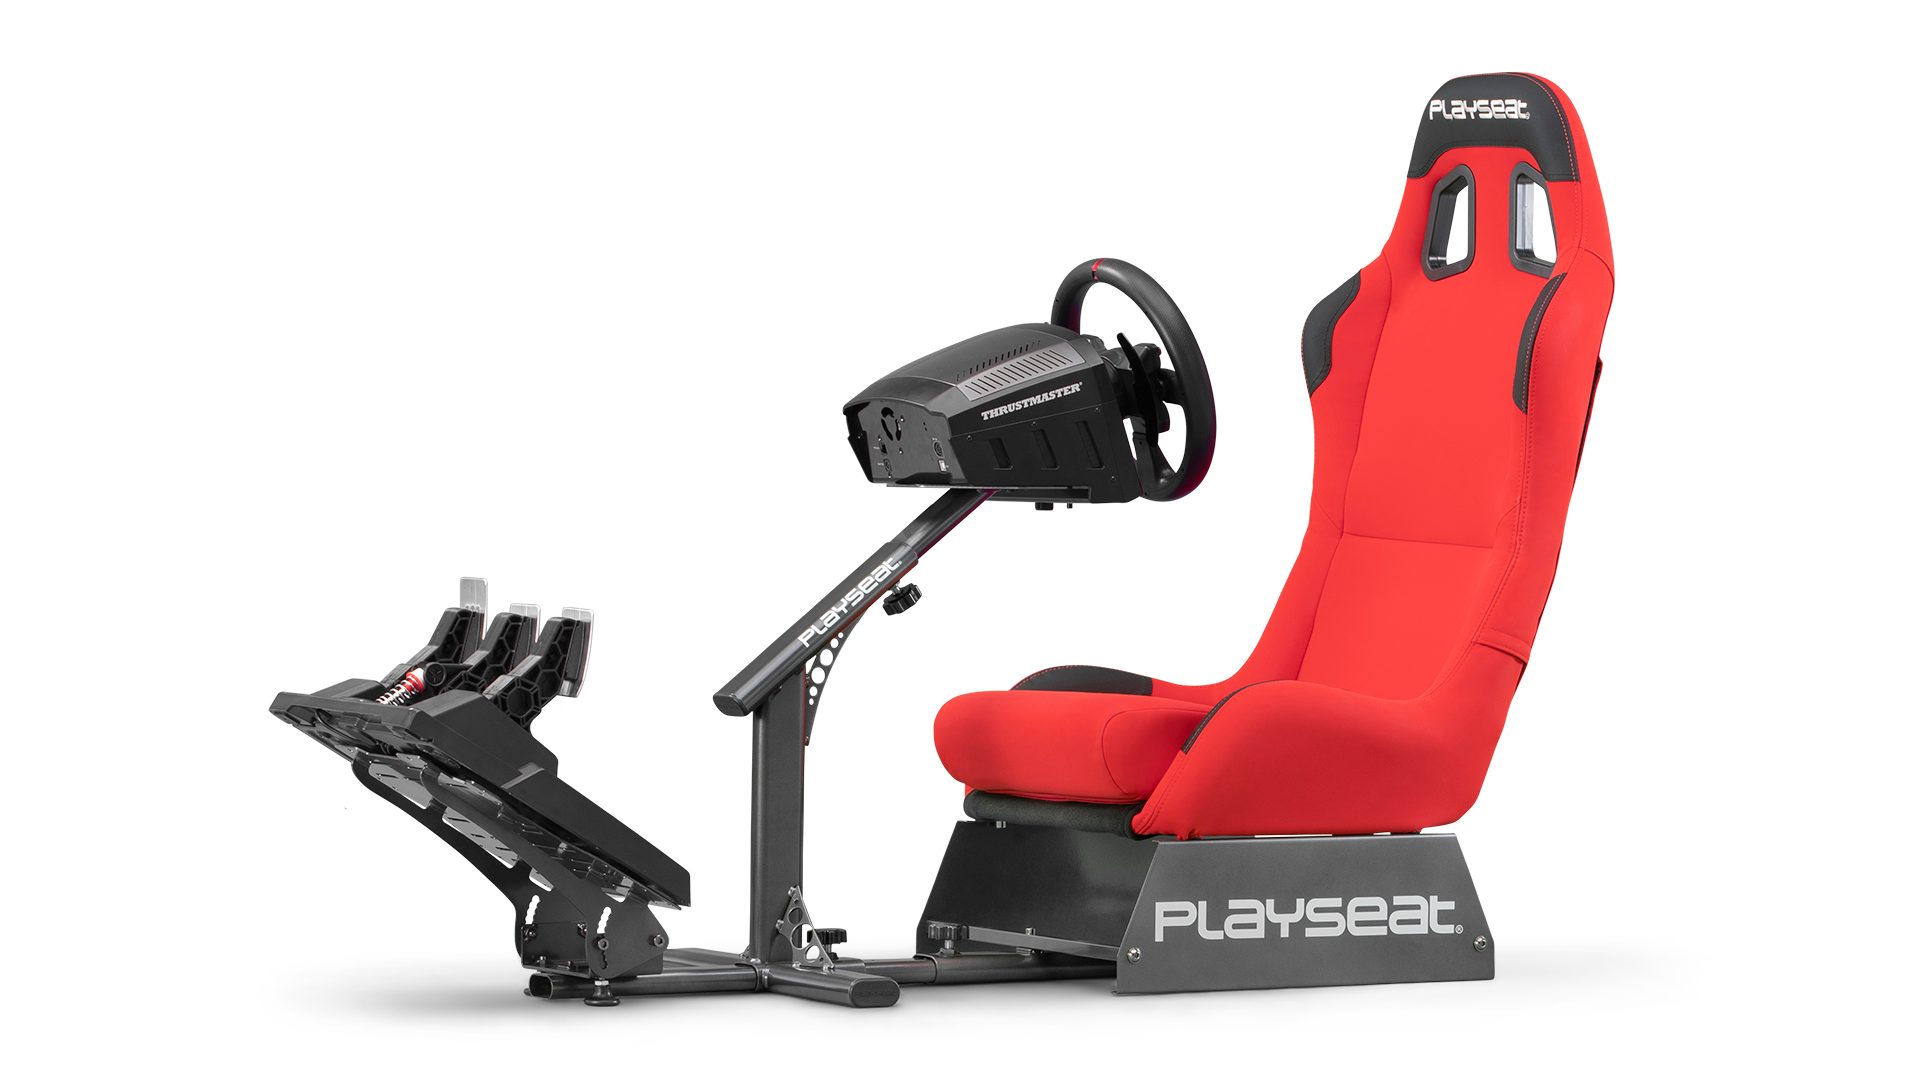 playseat-evolution-red-racing-simulator-front-angle-view-thrustmaster-1920x1080-1.png